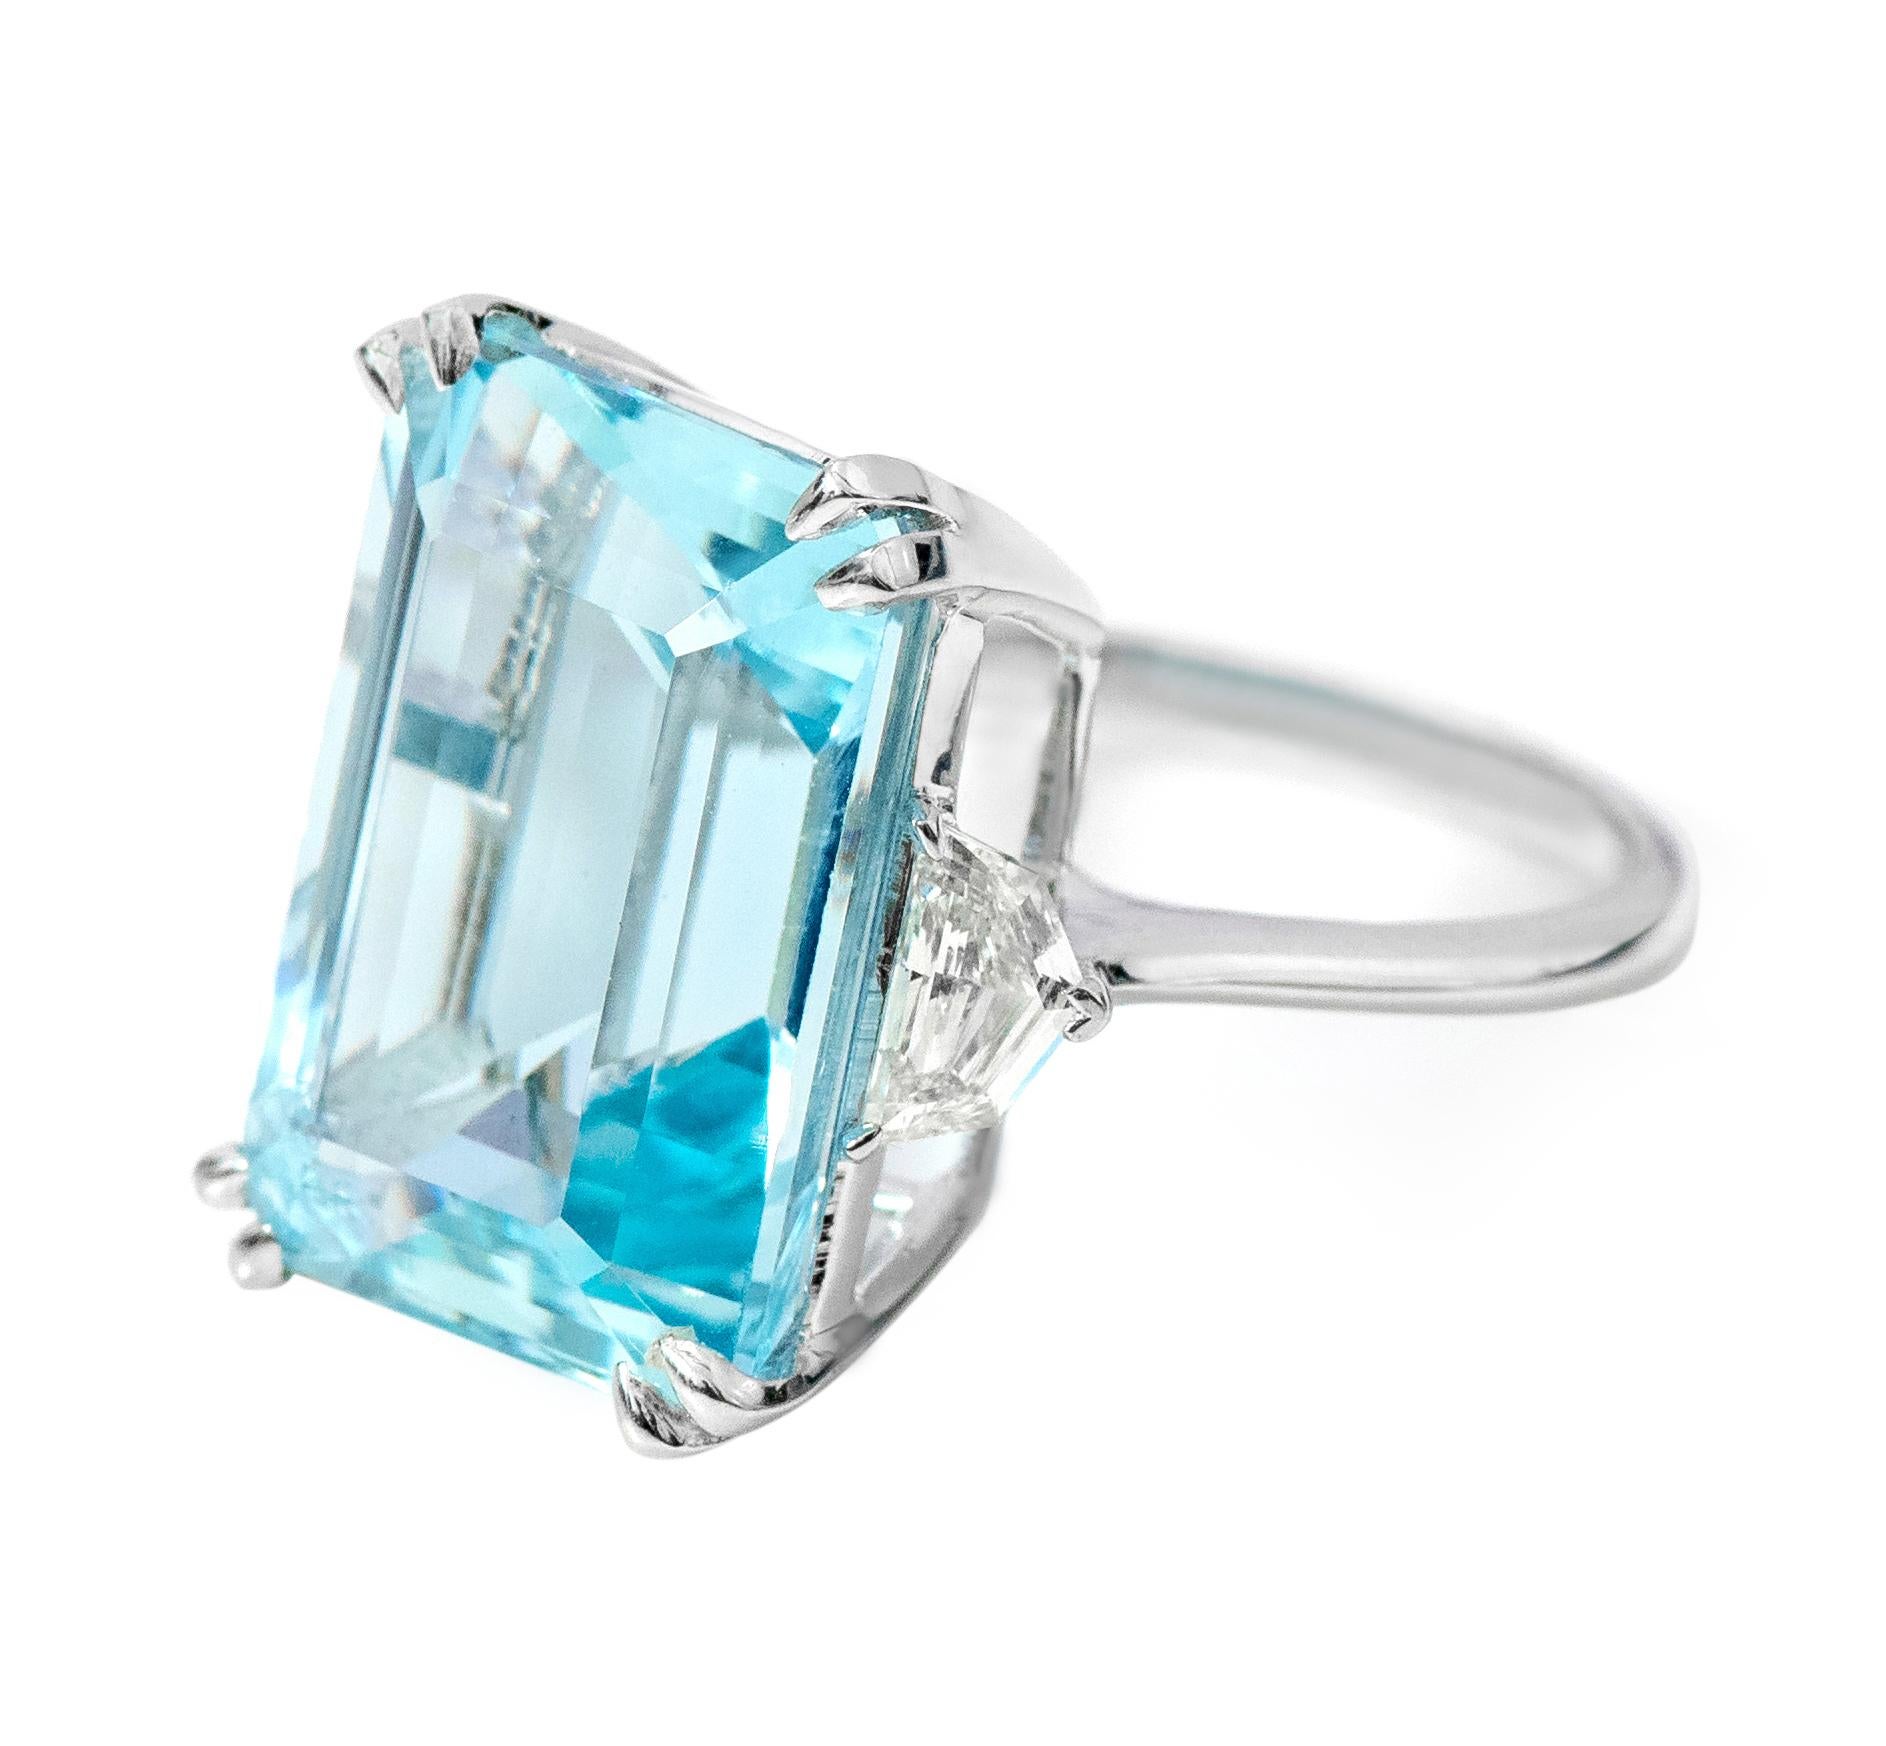 18 Karat White Gold 15.03 Carat Emerald-Cut Aquamarine and Diamond Cocktail Ring

This glorious Santa Maria aquamarine and diamond ring is royal. The three-stone trinity ring tells a story by not only representing the said “past, present, and